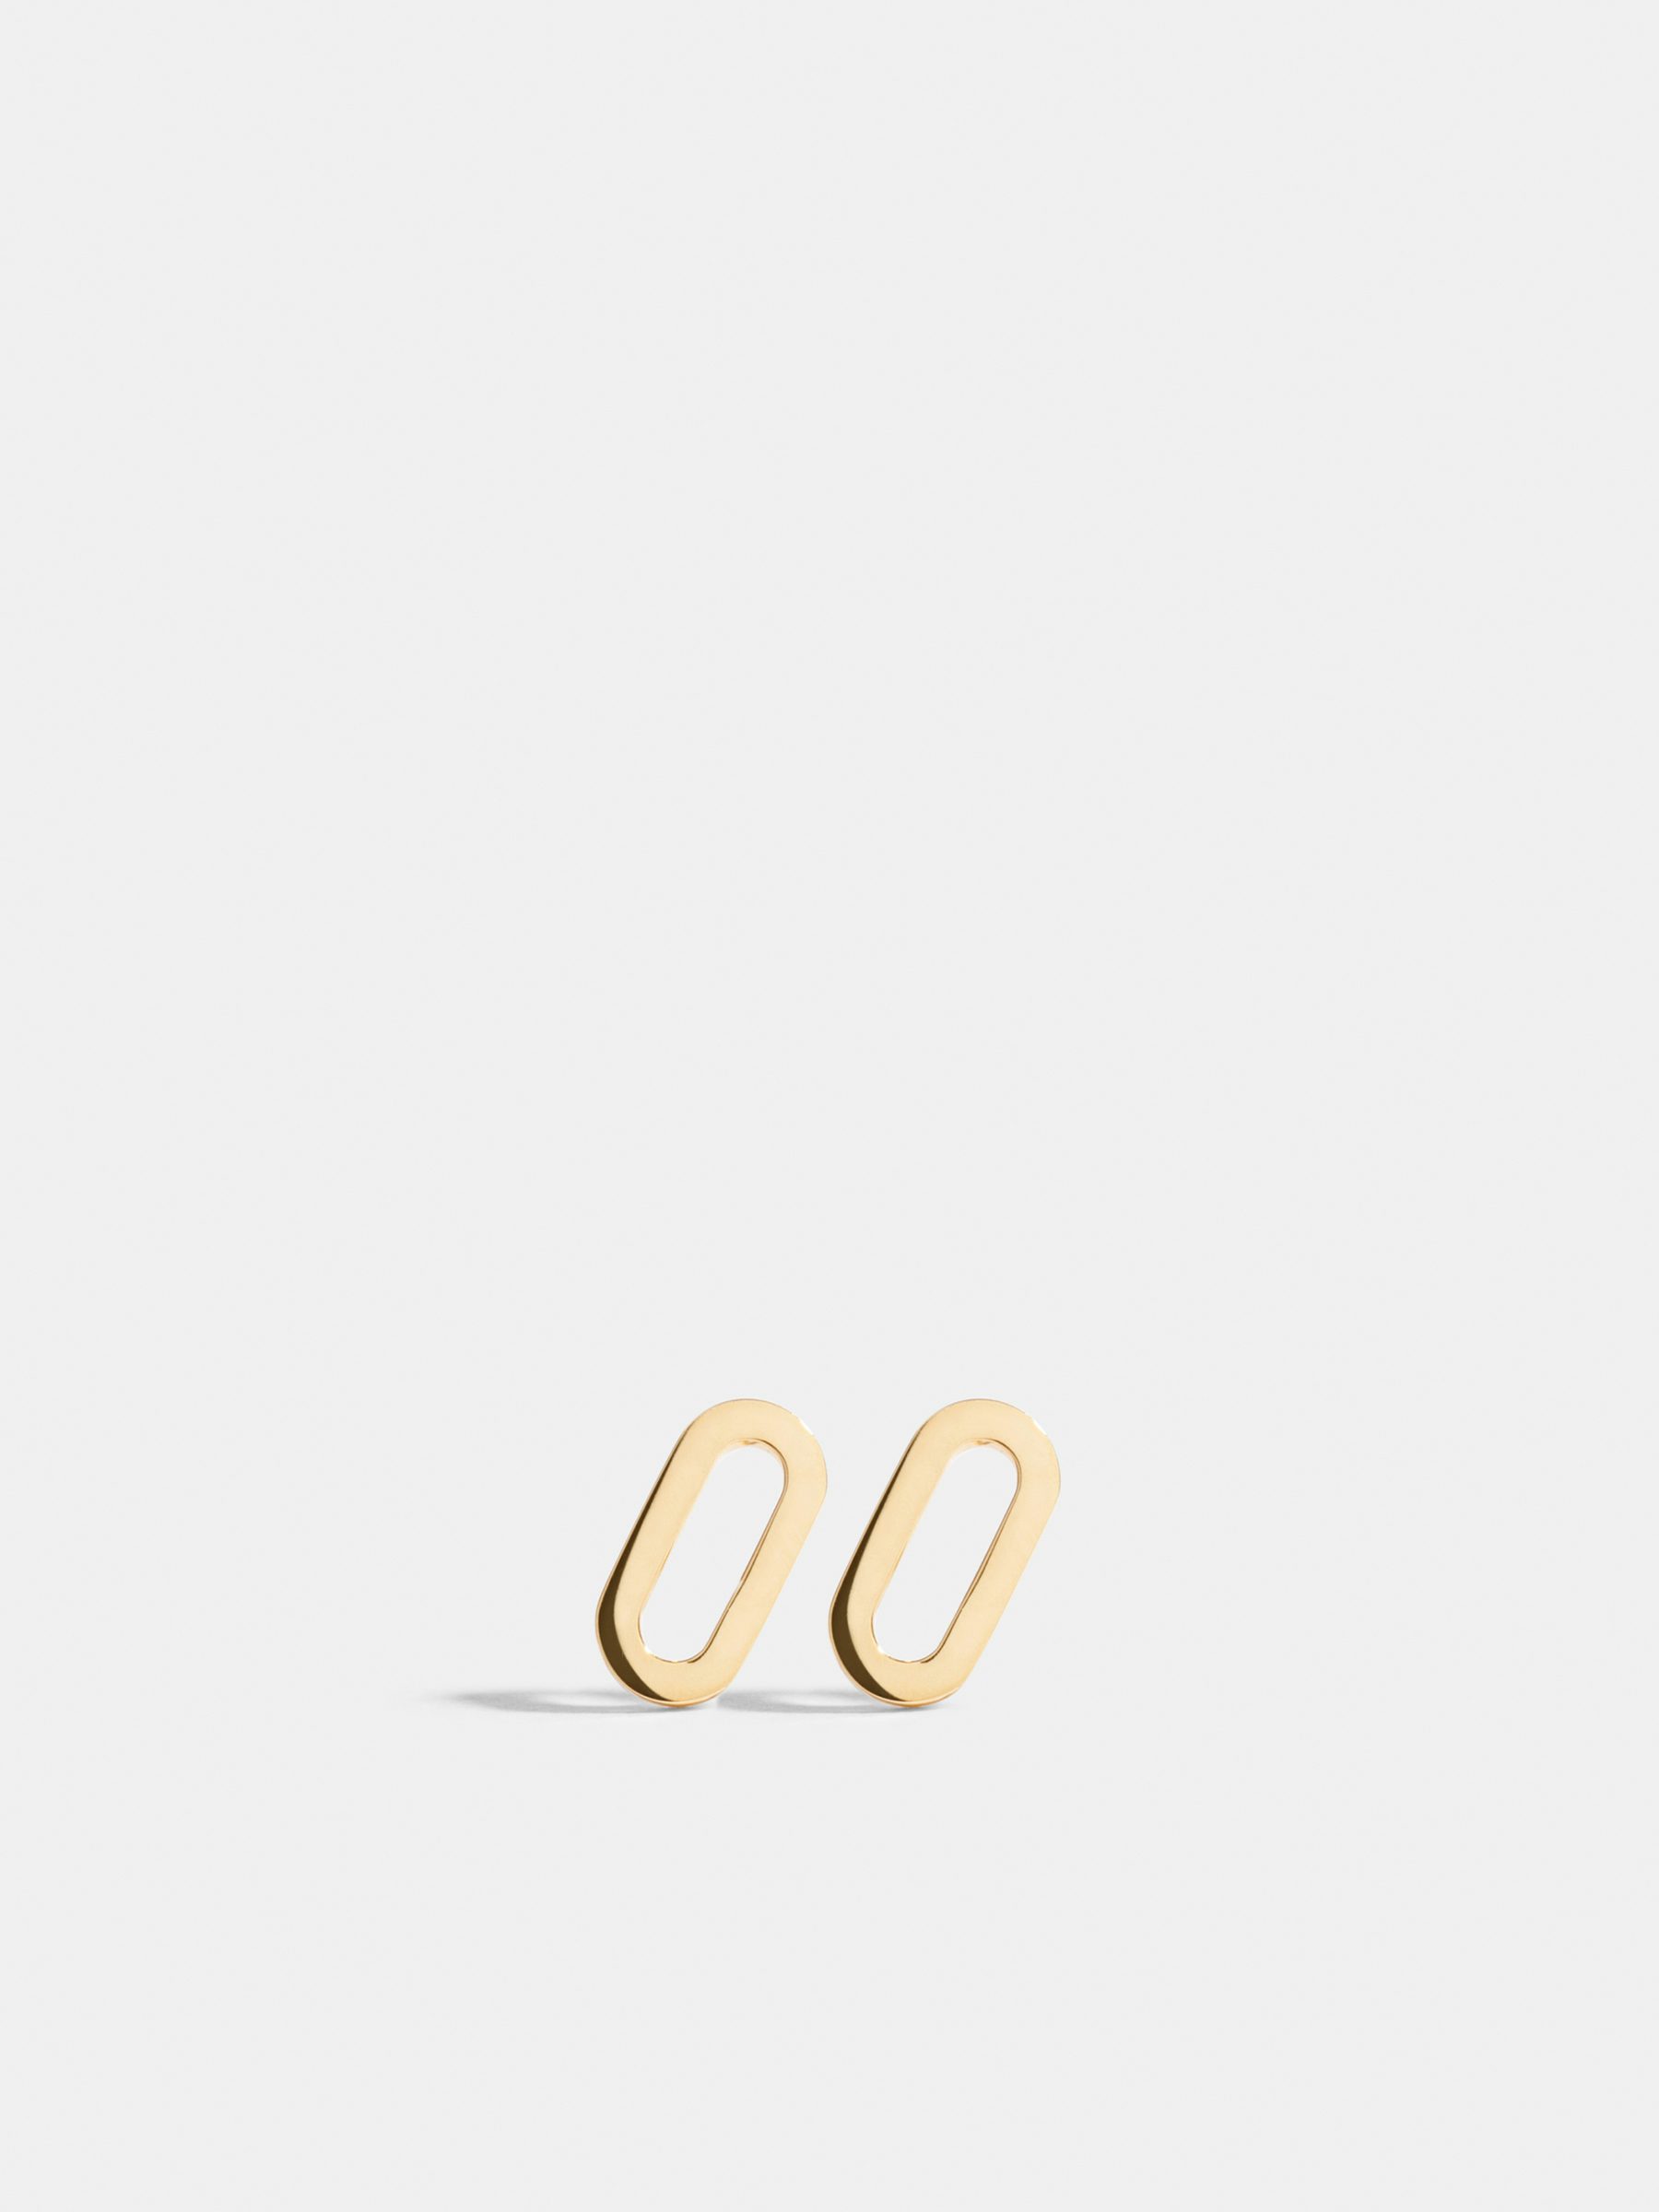 Ear clip in 18k ethical yellow gold certified Fairmined, the pair | JEM jewellery ethically minded